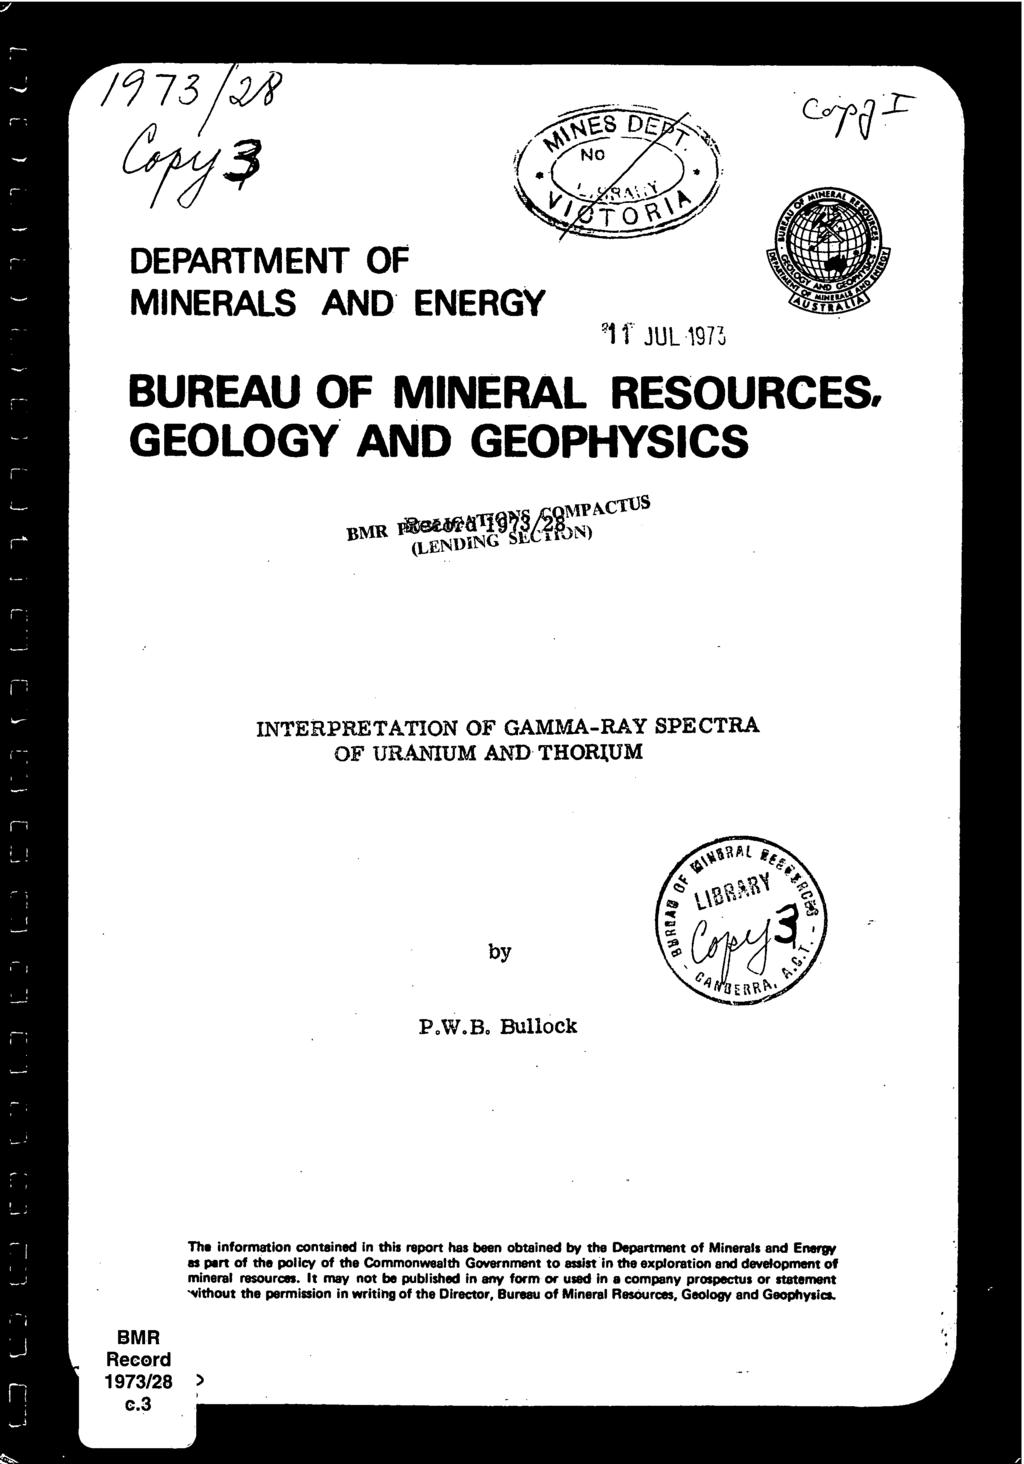 /973,,VS' DEPARTMENT OF MNERALS AND ENERGY f JUL 197L BUREAU OF MNERAL RESOURCES. GEOLOGY AND GEOPHYSCS BMR leet.